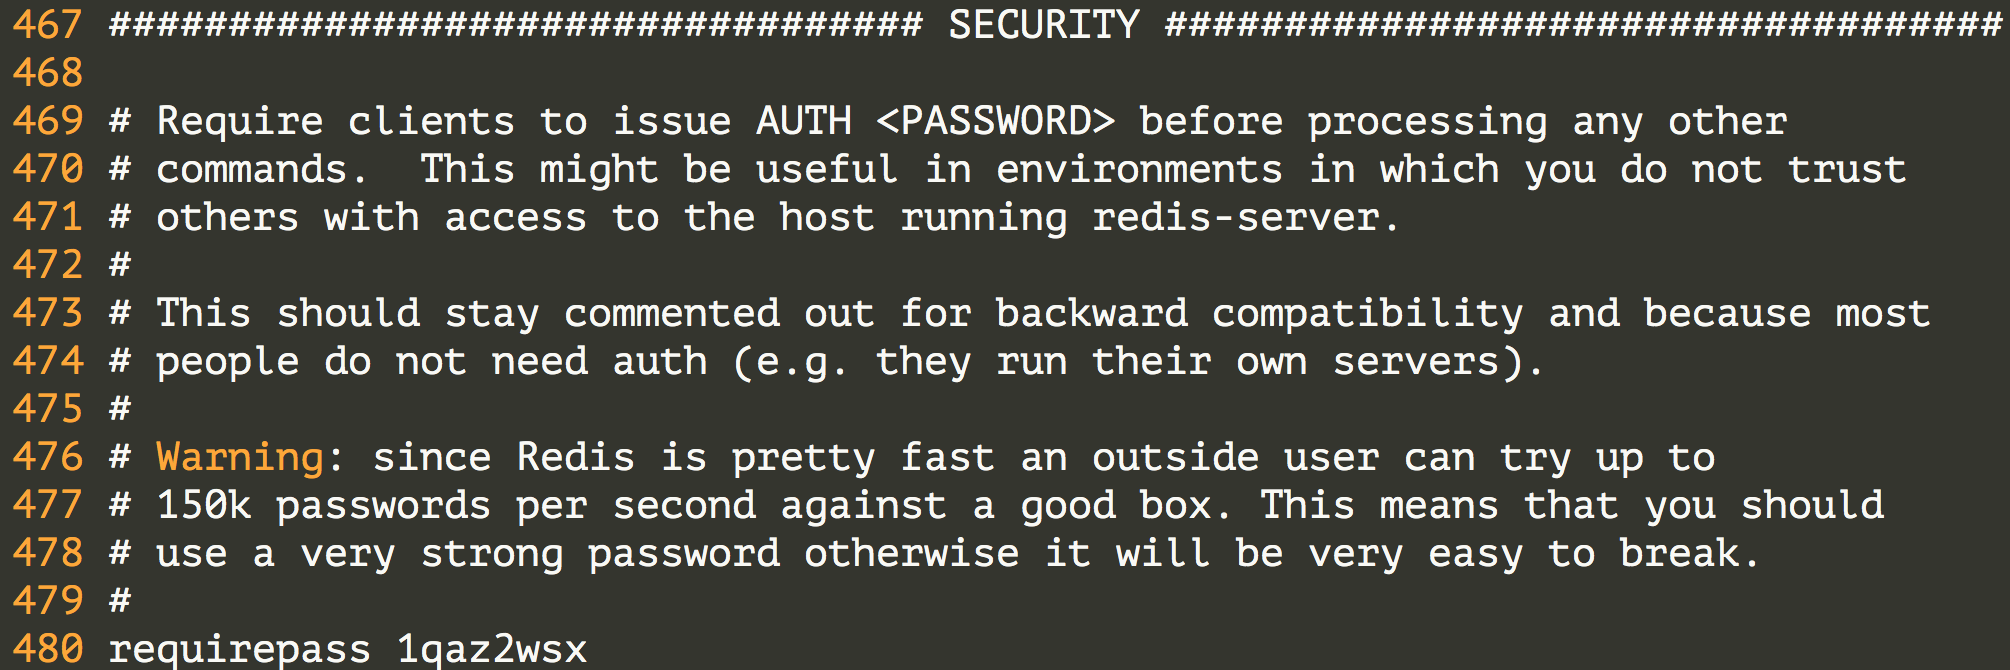 Day66-75/res/redis-security.png